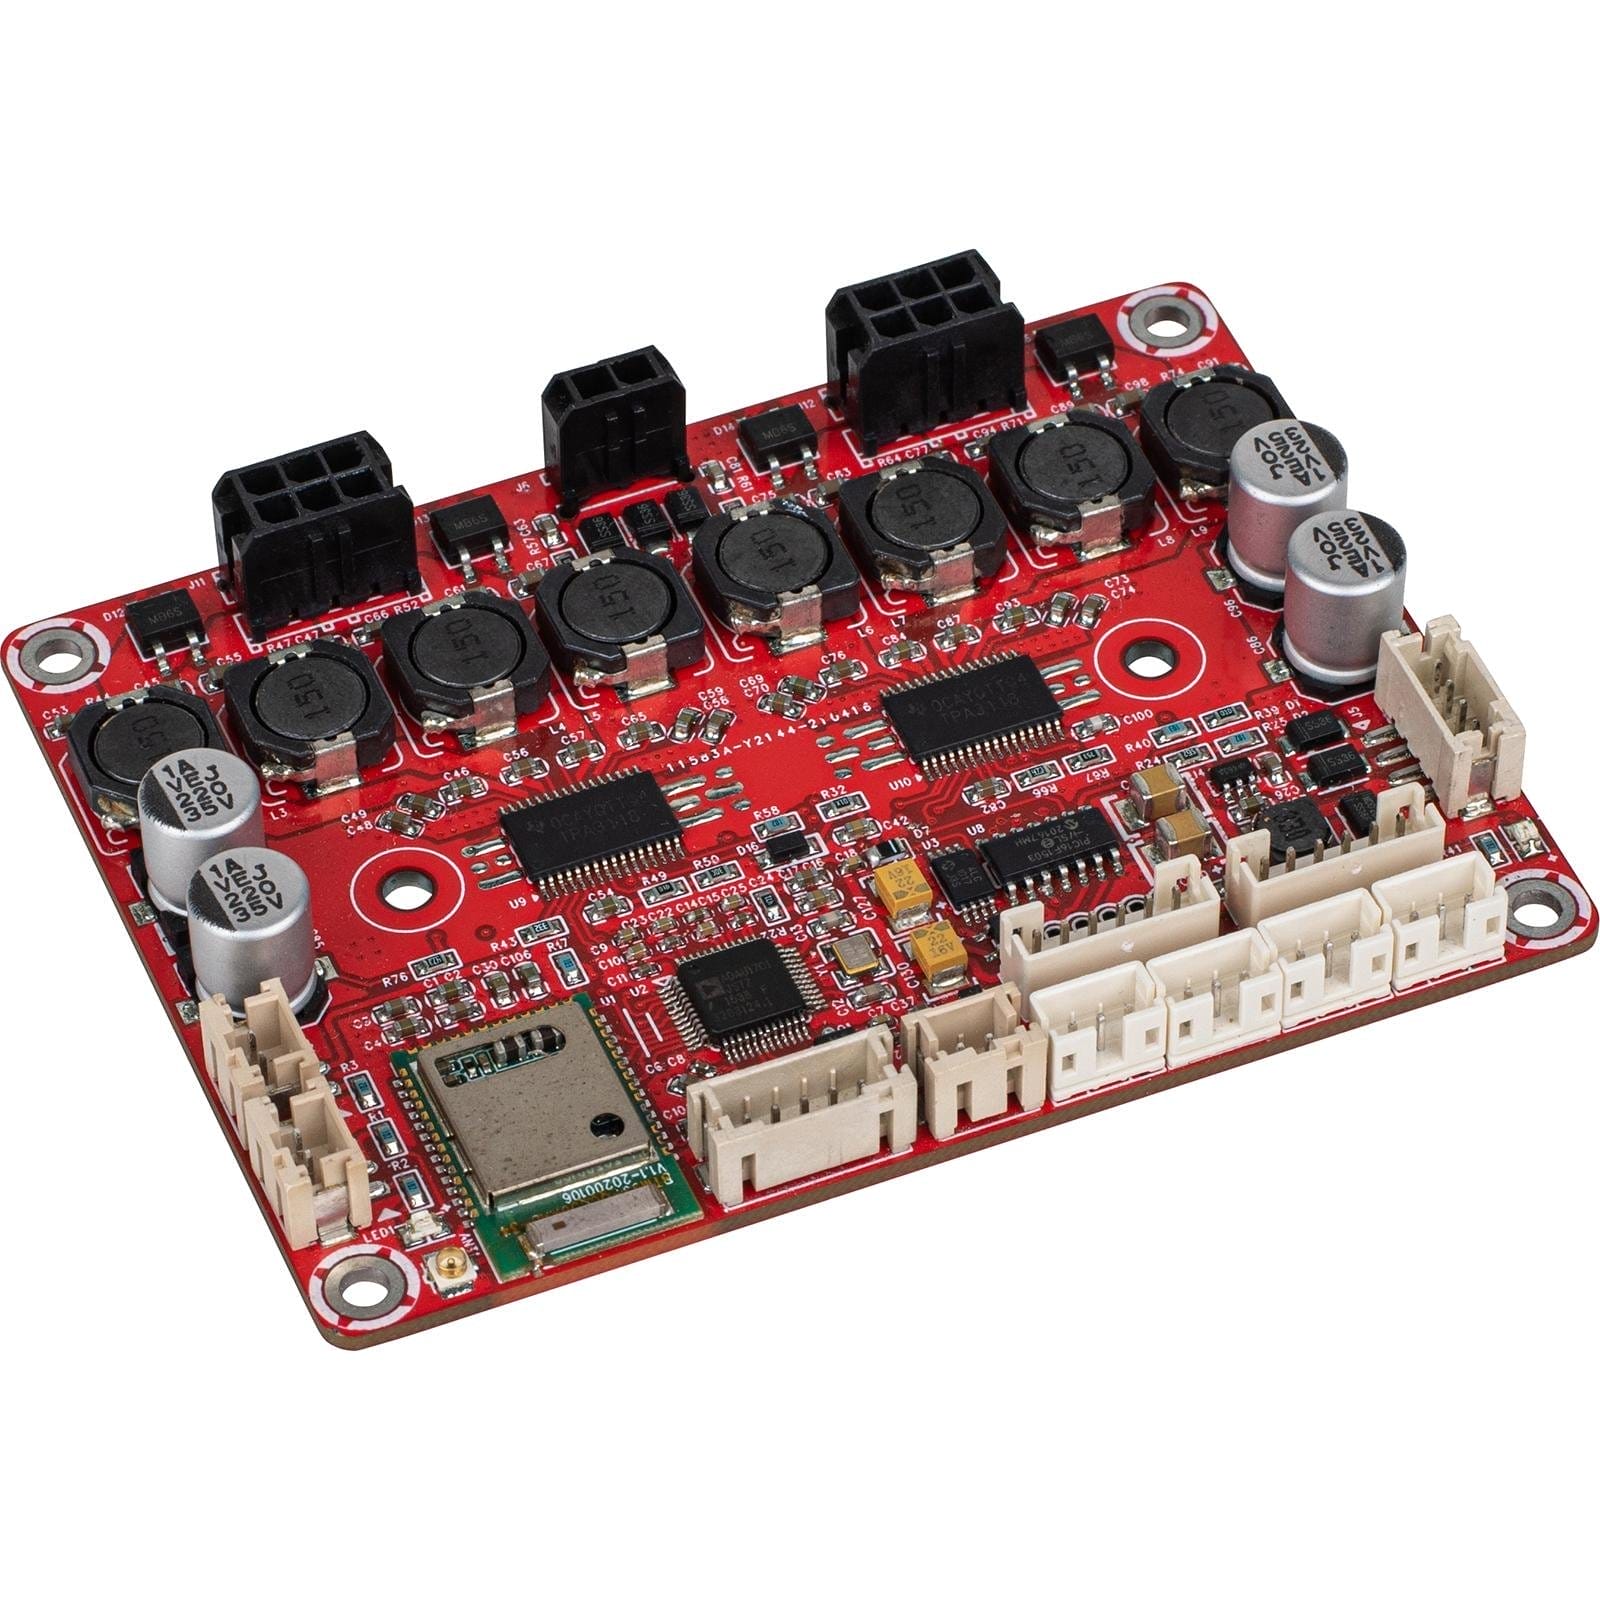 Image of Dayton Audio KABD-430 4 x 30W All-in-one Amplifier Board with DSP and Bluetooth 5.0 aptX HD